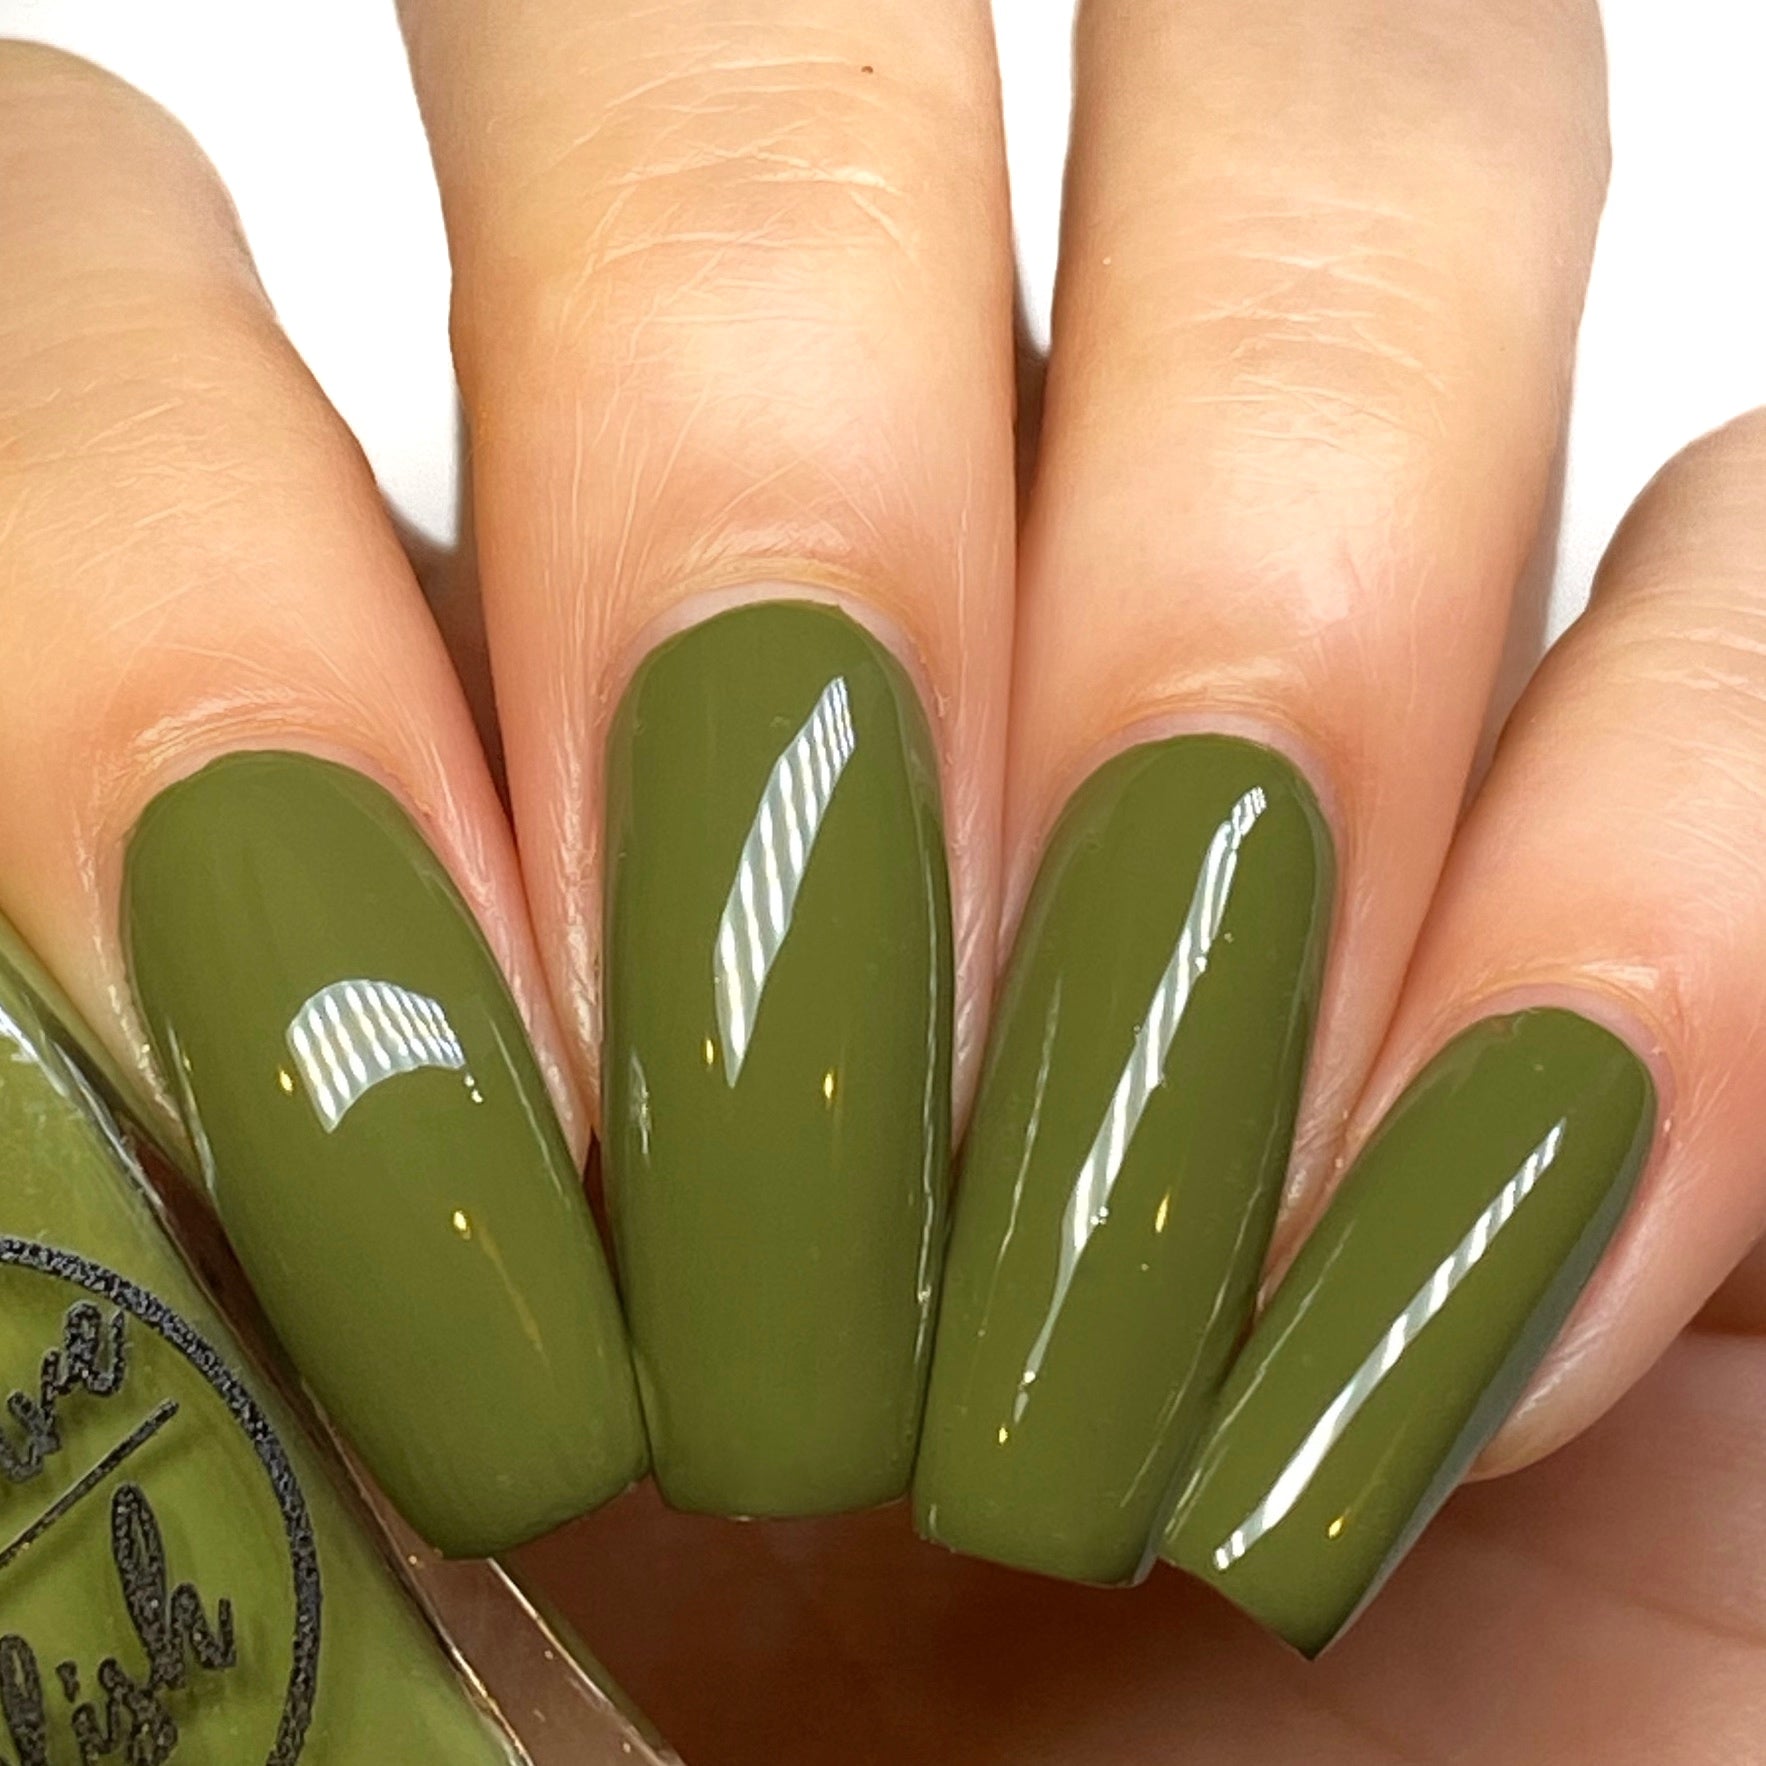 53 Chic Matte Green Nail Ideas for Your Next Mani Session